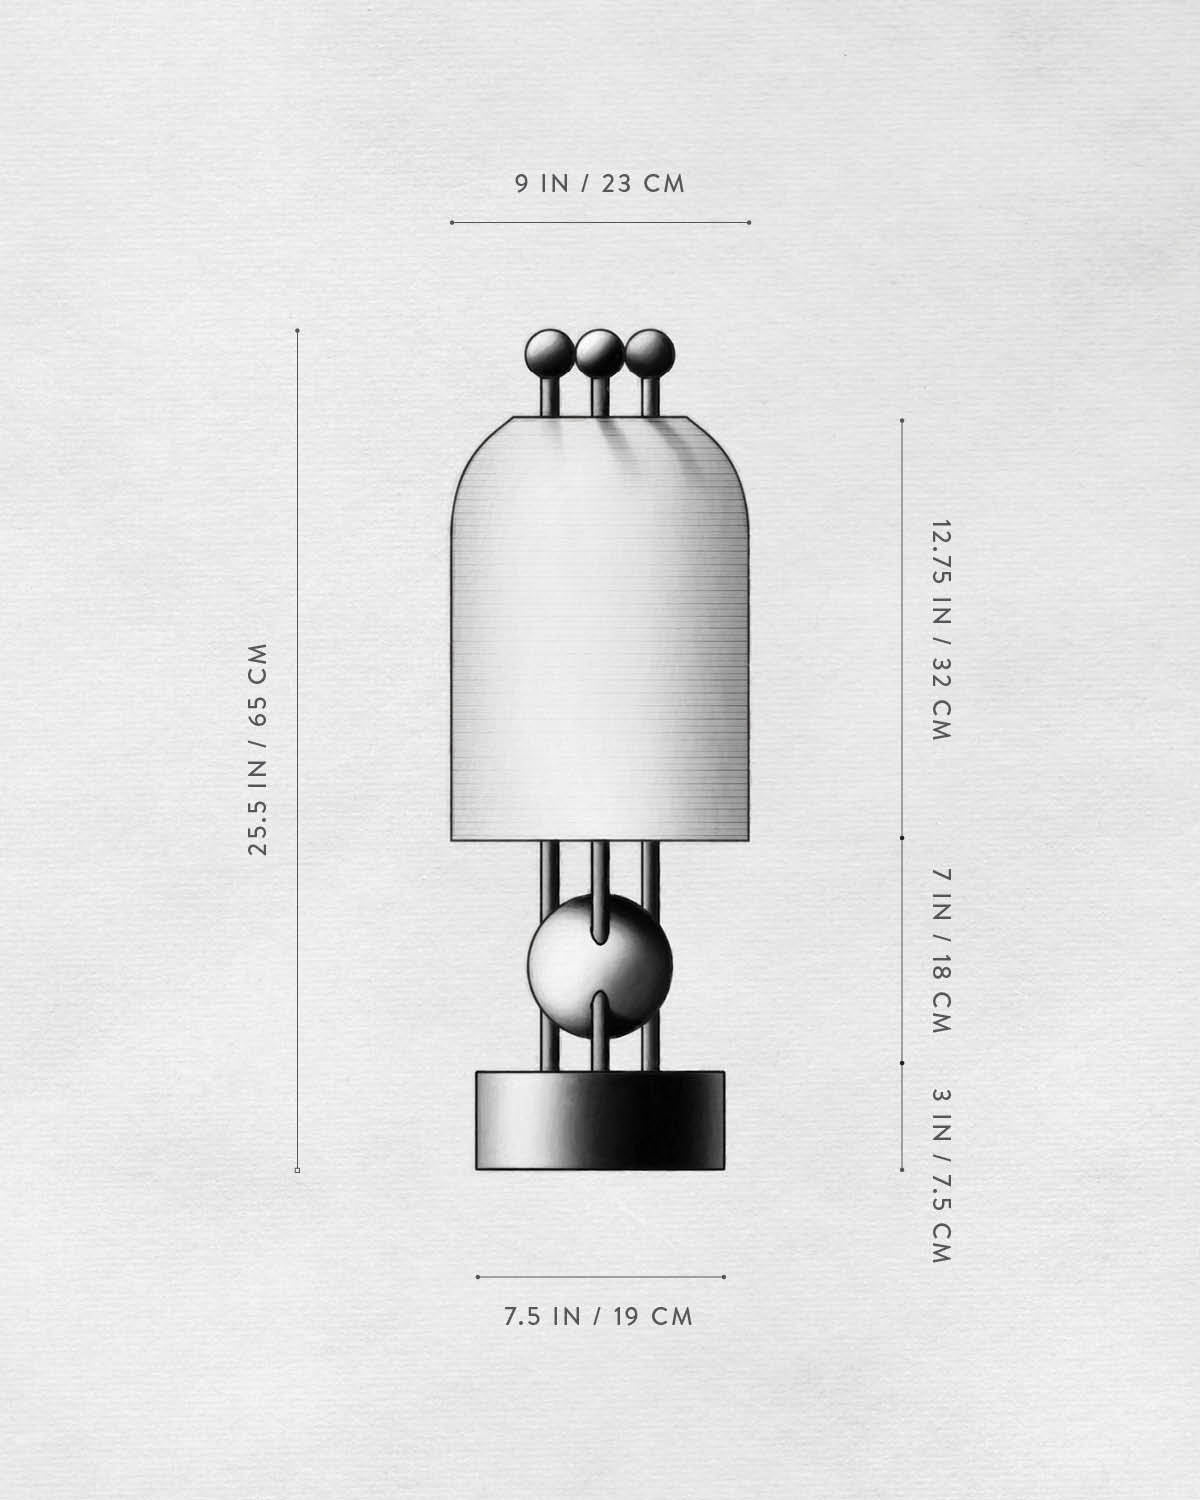 Technical drawing of LANTERN : TABLE LAMP.